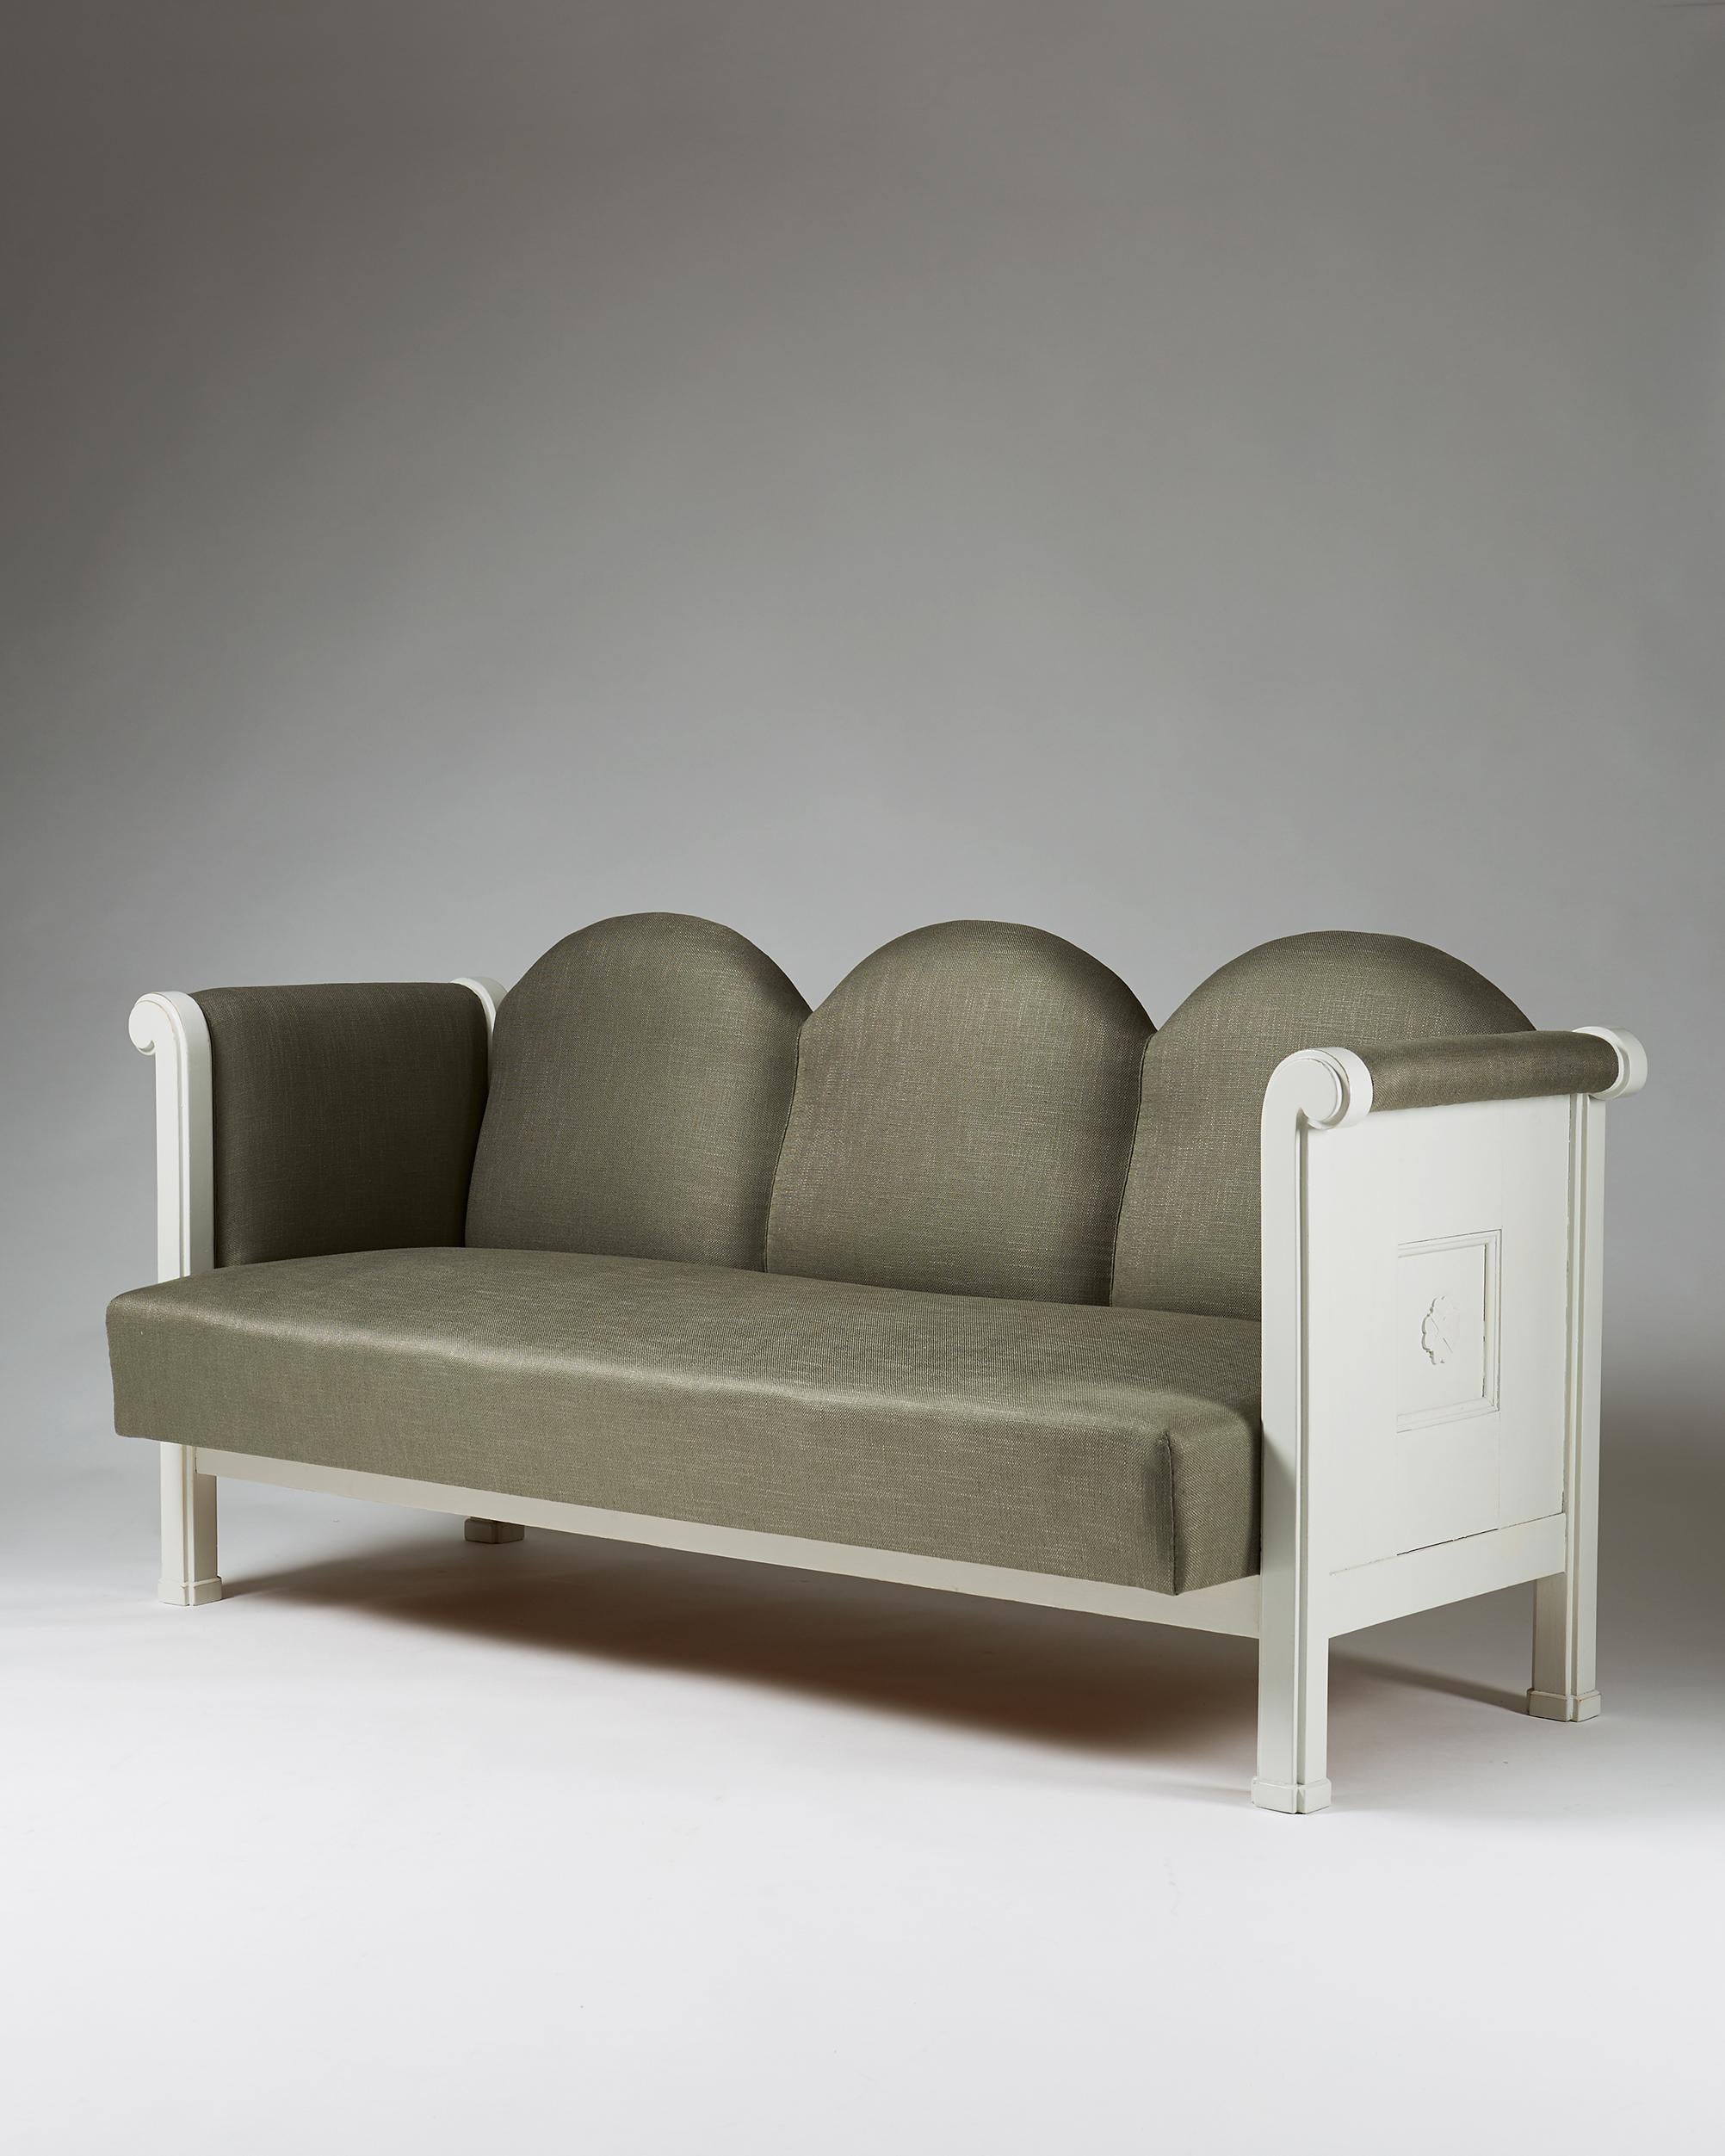 White painted wood, newly upholstered in linen fabric.

Measures: L 195 cm/ 6' 5 1/4''
H 86 cm/ 2' 10''
D 88 cm/ 2' 11''

Custom order from Eliel Saarinen to Munksnäs hotel, Finland.
These models only produced for the hotel.